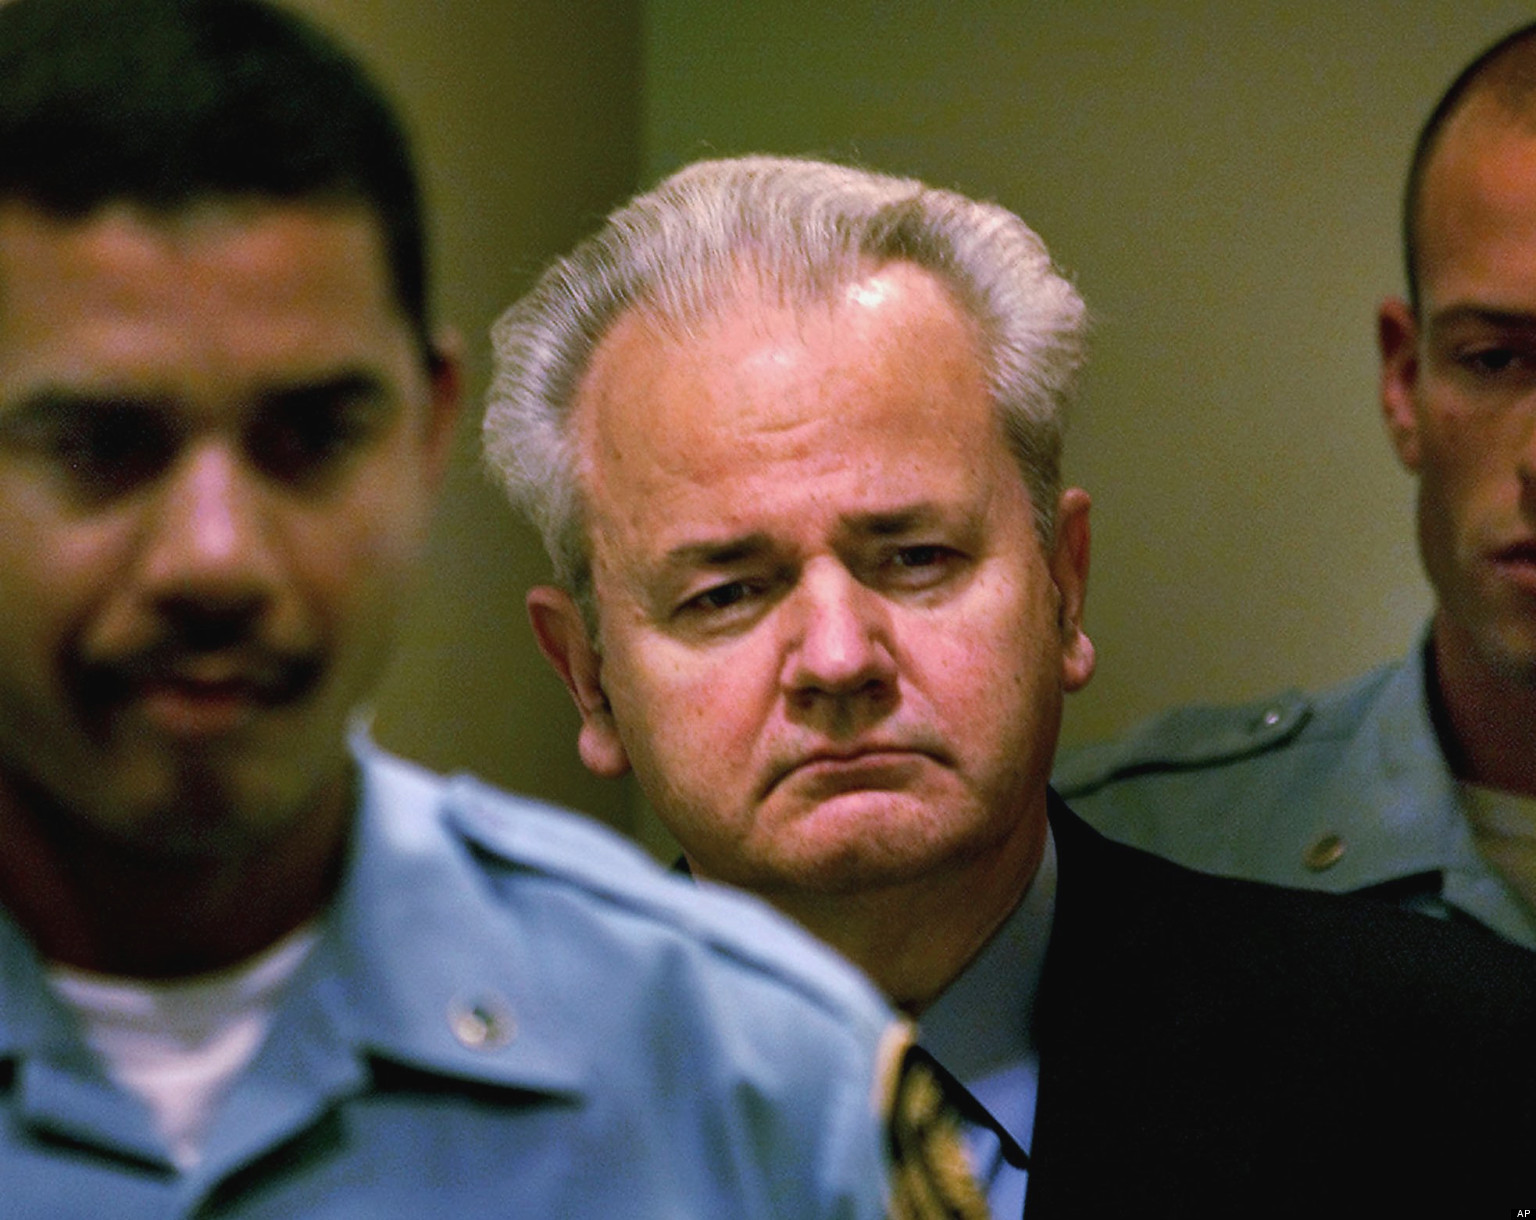 "Equality means nothing unless incorporated into the institutions." <i>â€“Slobodan Milosevic (1941-2006, President of Yugoslavia, perpetrator of genocide, war crimes and murder; responsible for the deaths of up to 230,000)</i>